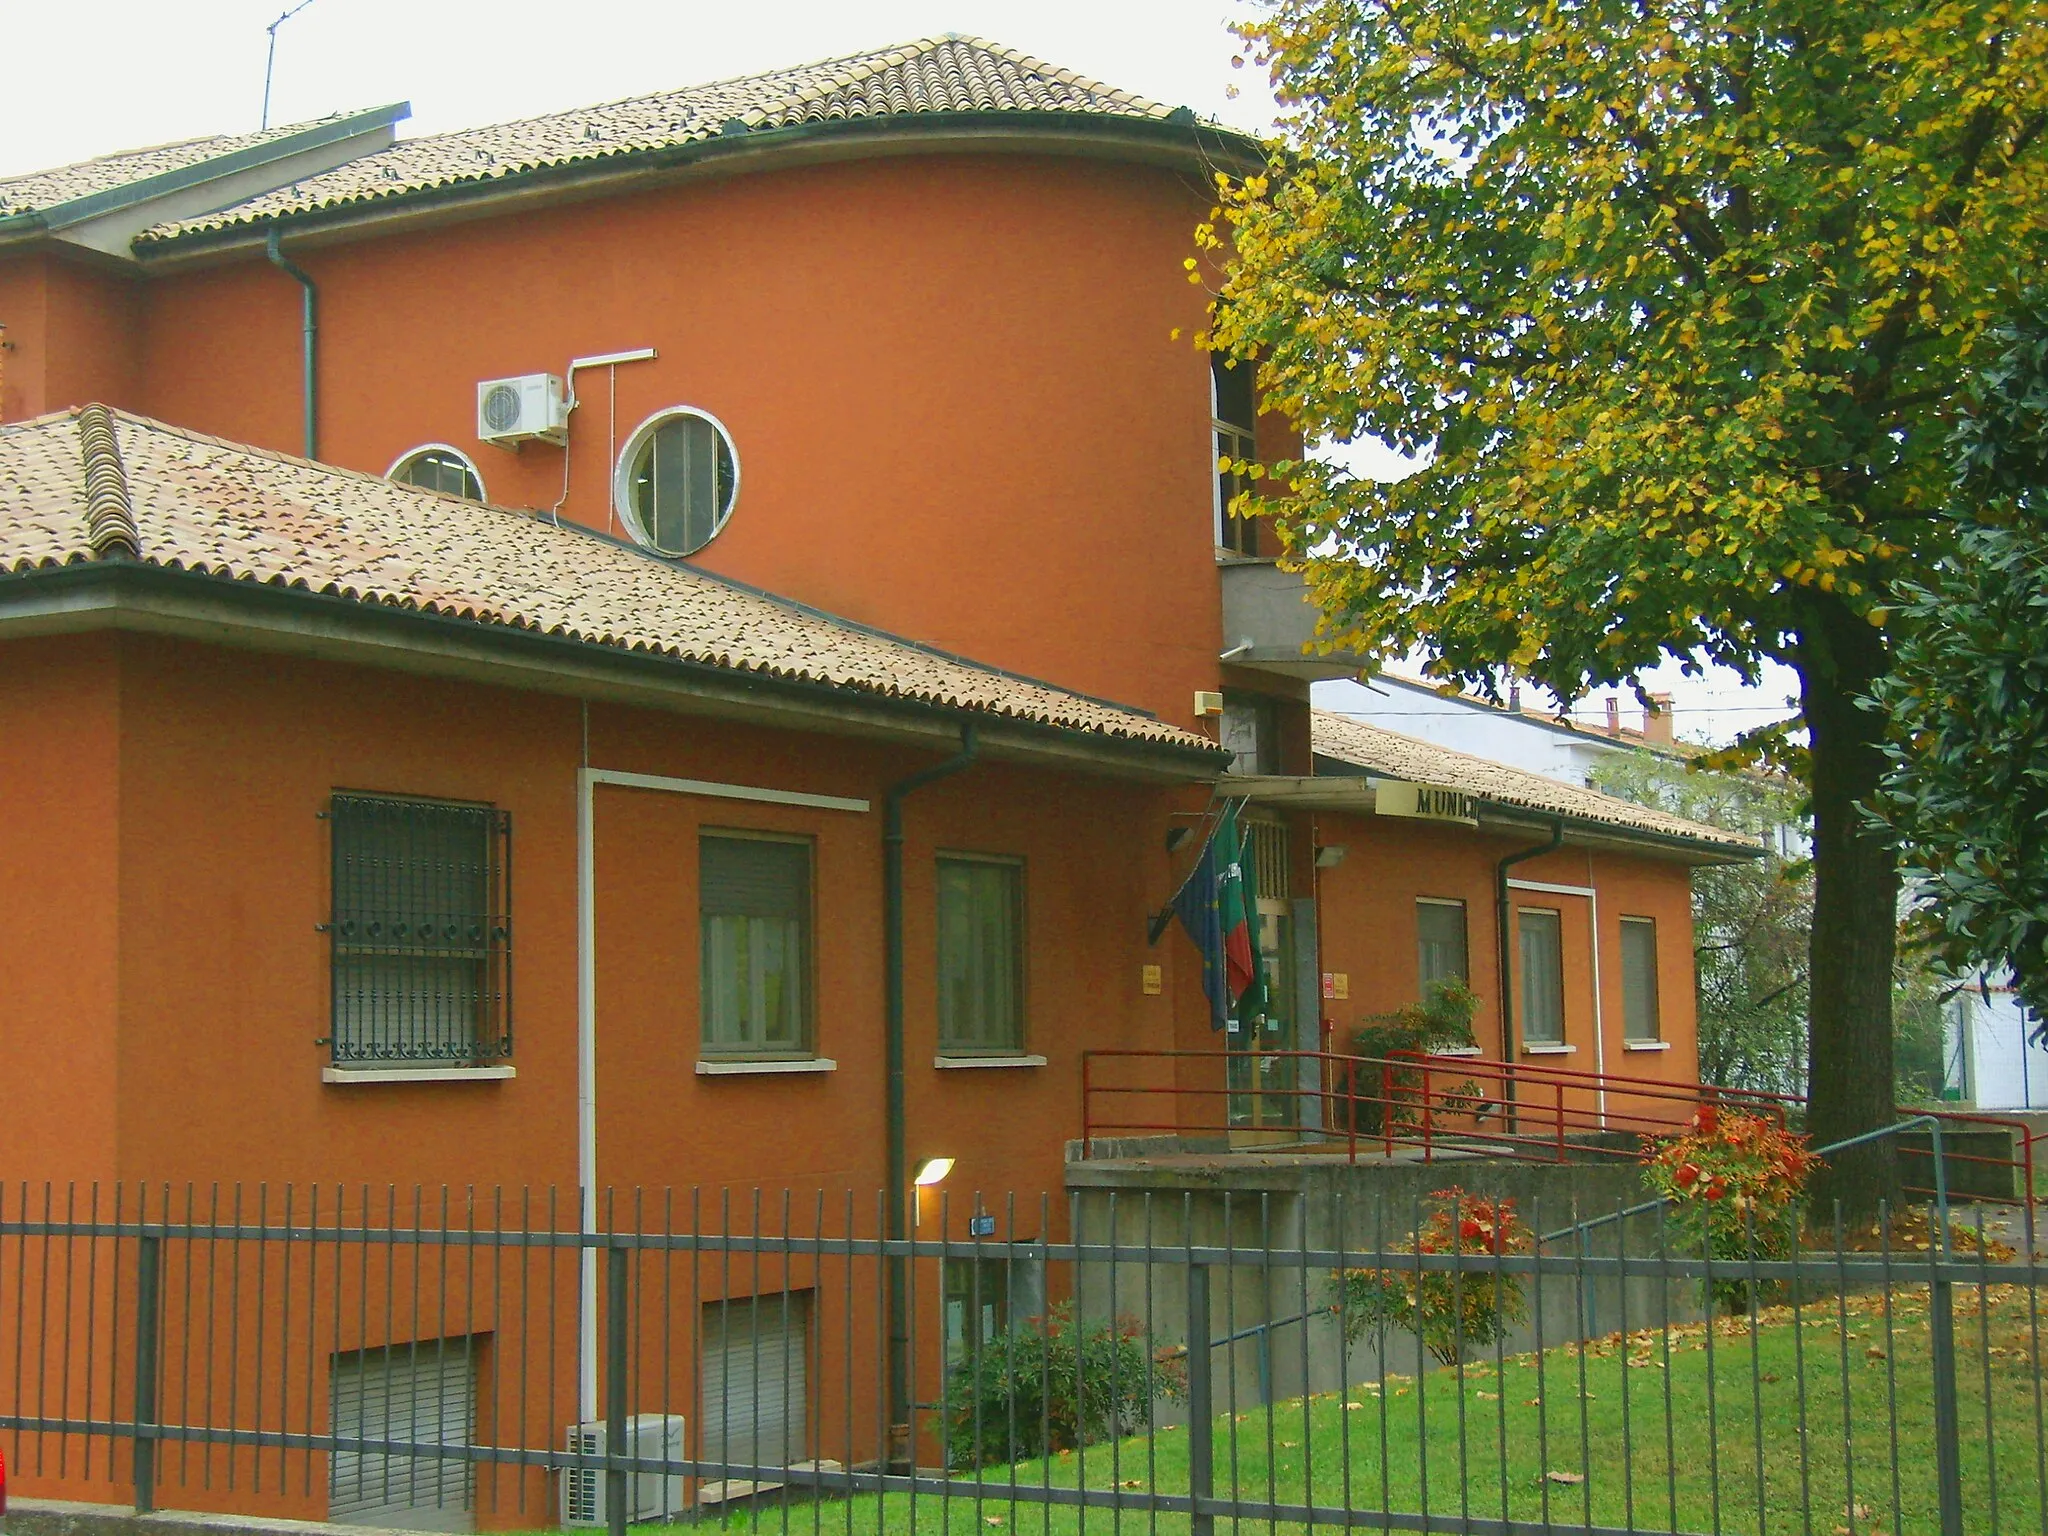 Photo showing: Town hall in Zelo Buon Persico (LO), Italy